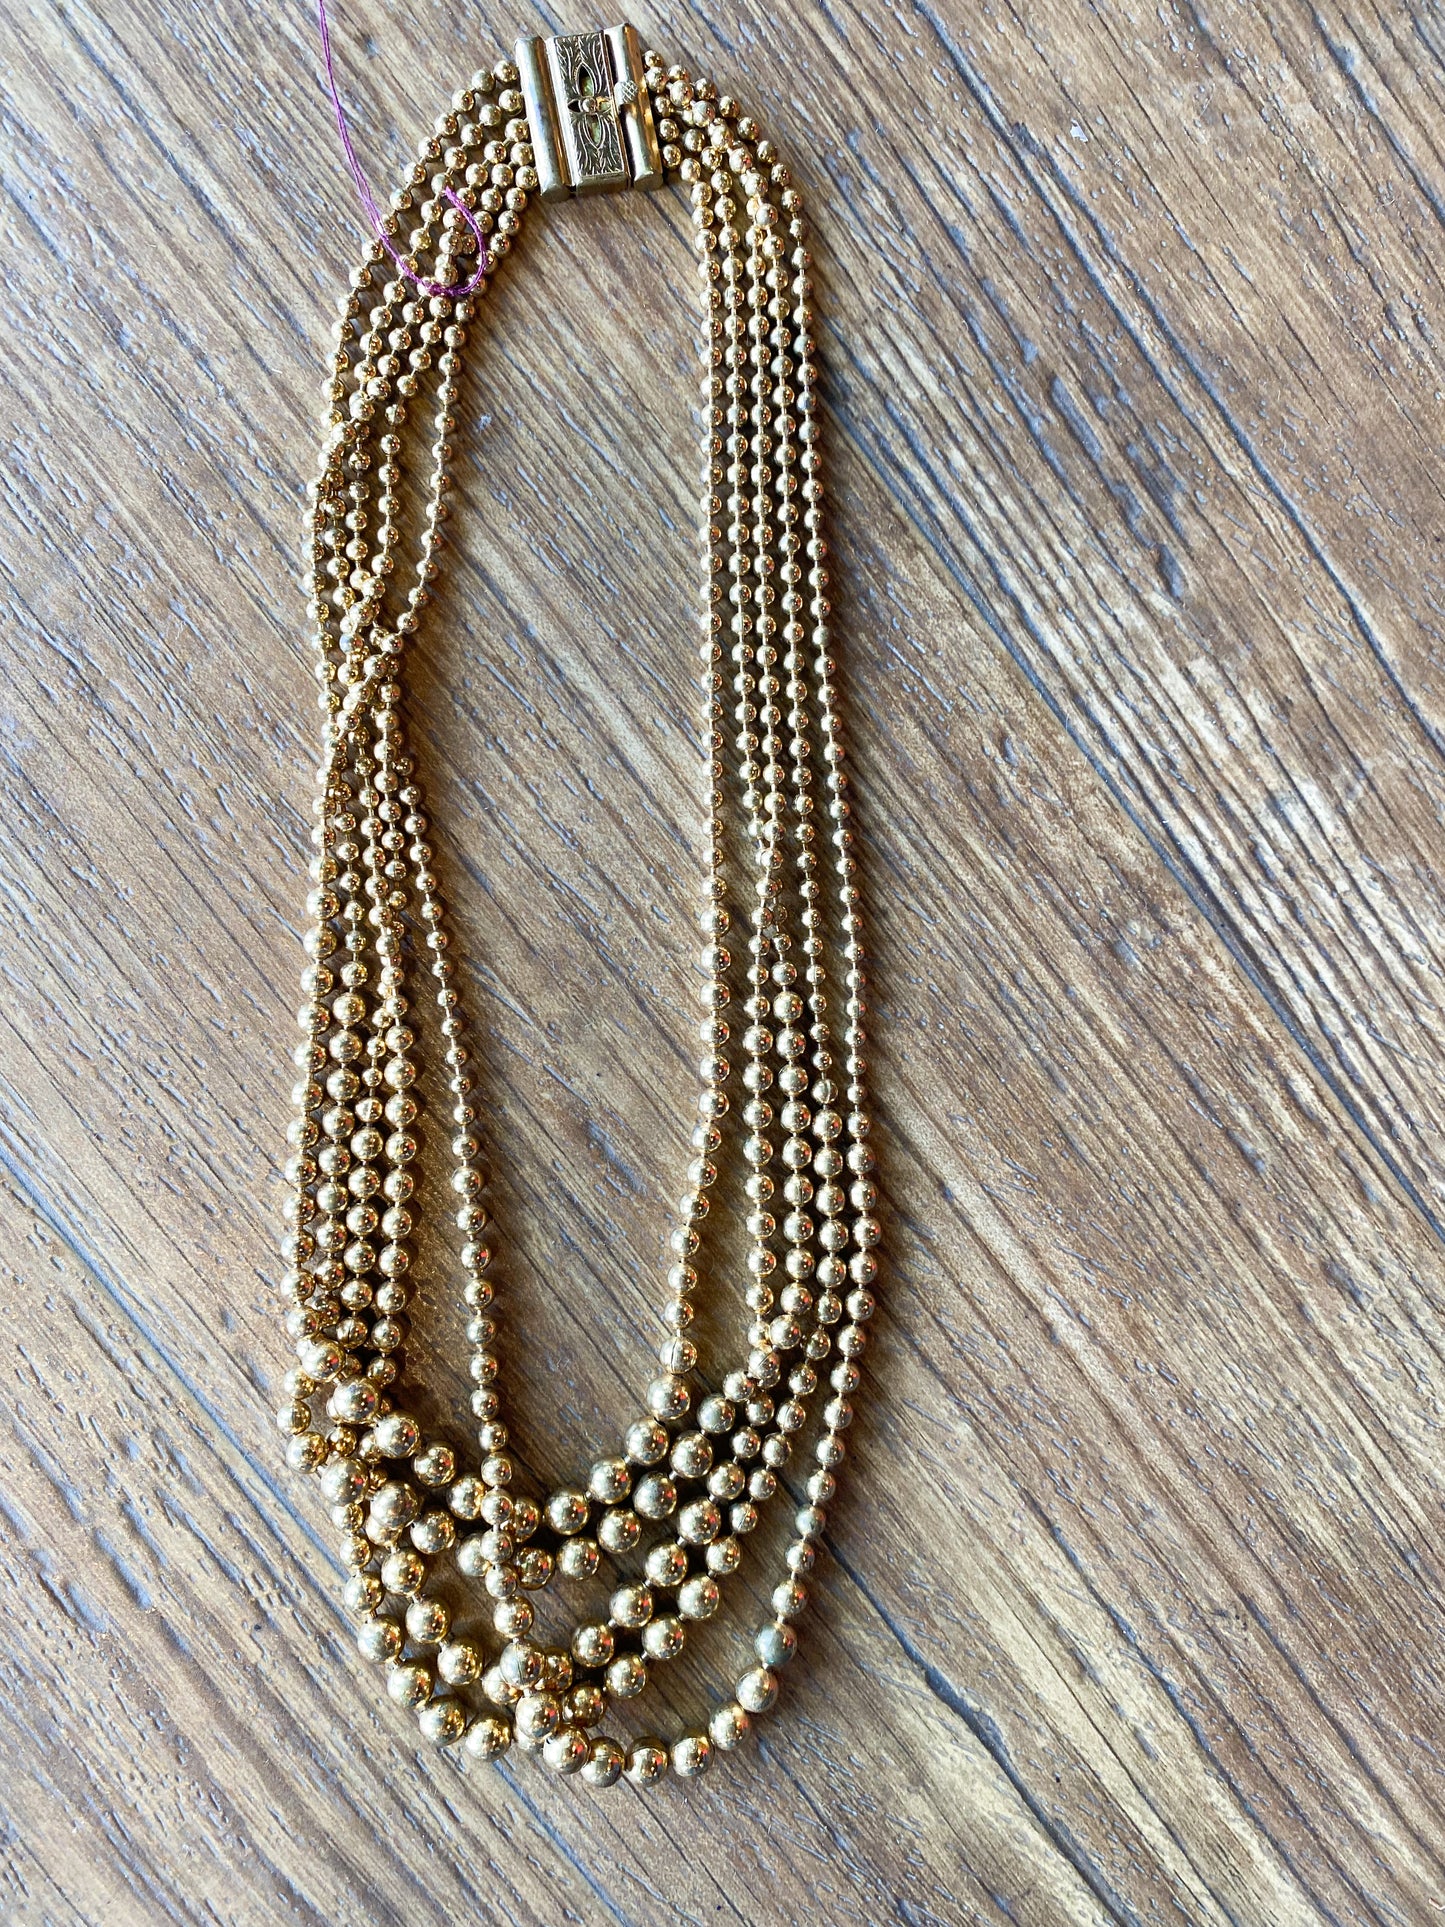 Multi stand vintage metal gold bead necklace